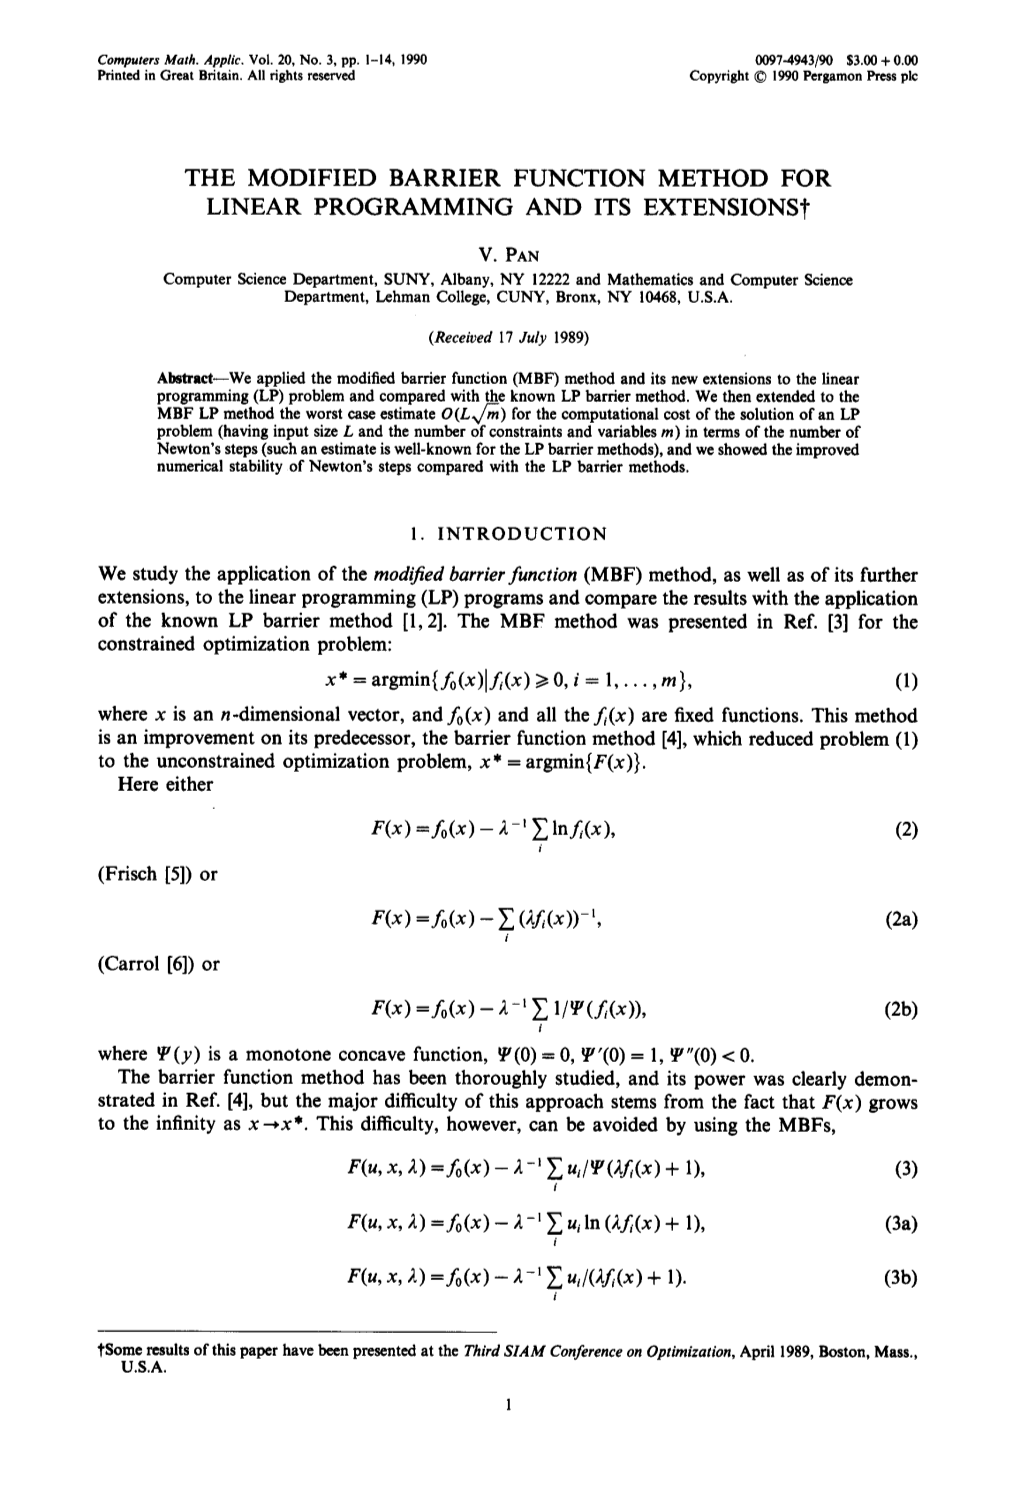 The Modified Barrier Function Method for Linear Programming and Its Extensions